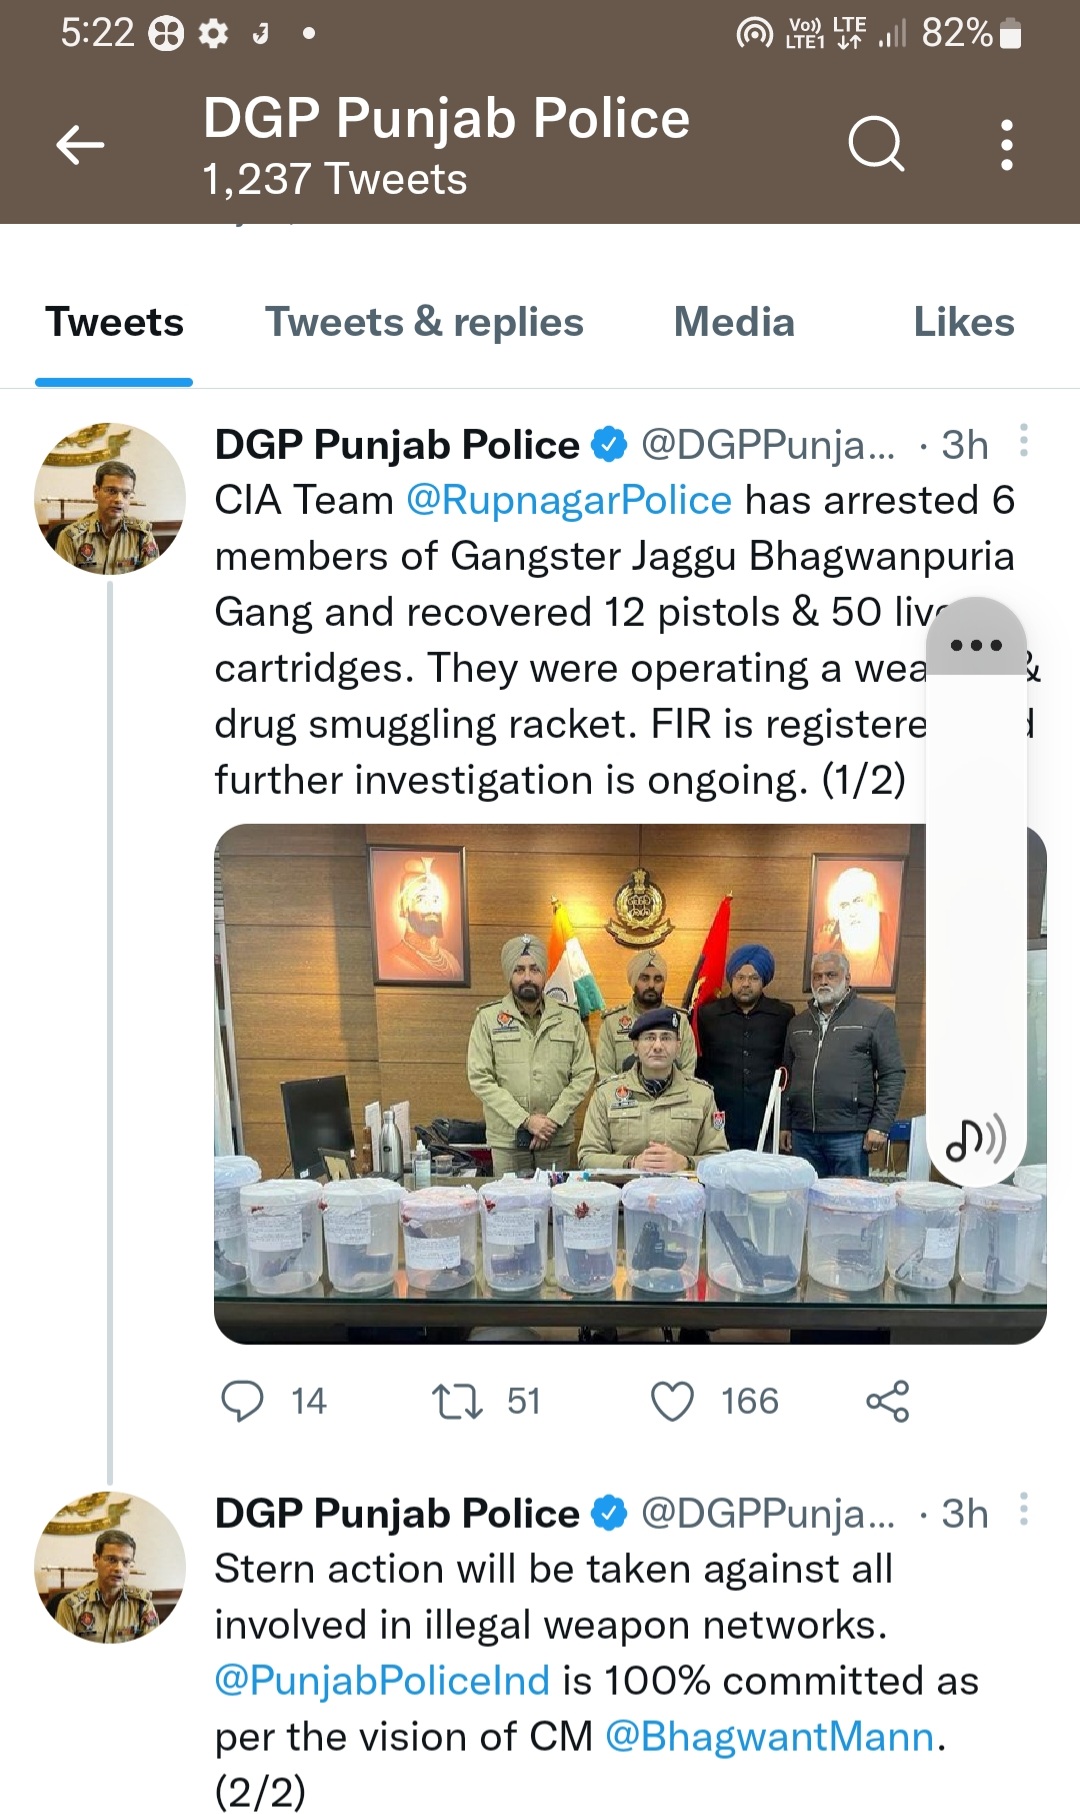 The Rupnagar police has claimed to have arrested 6 members of gangster Jaggu Bhagwanpuria gang today.